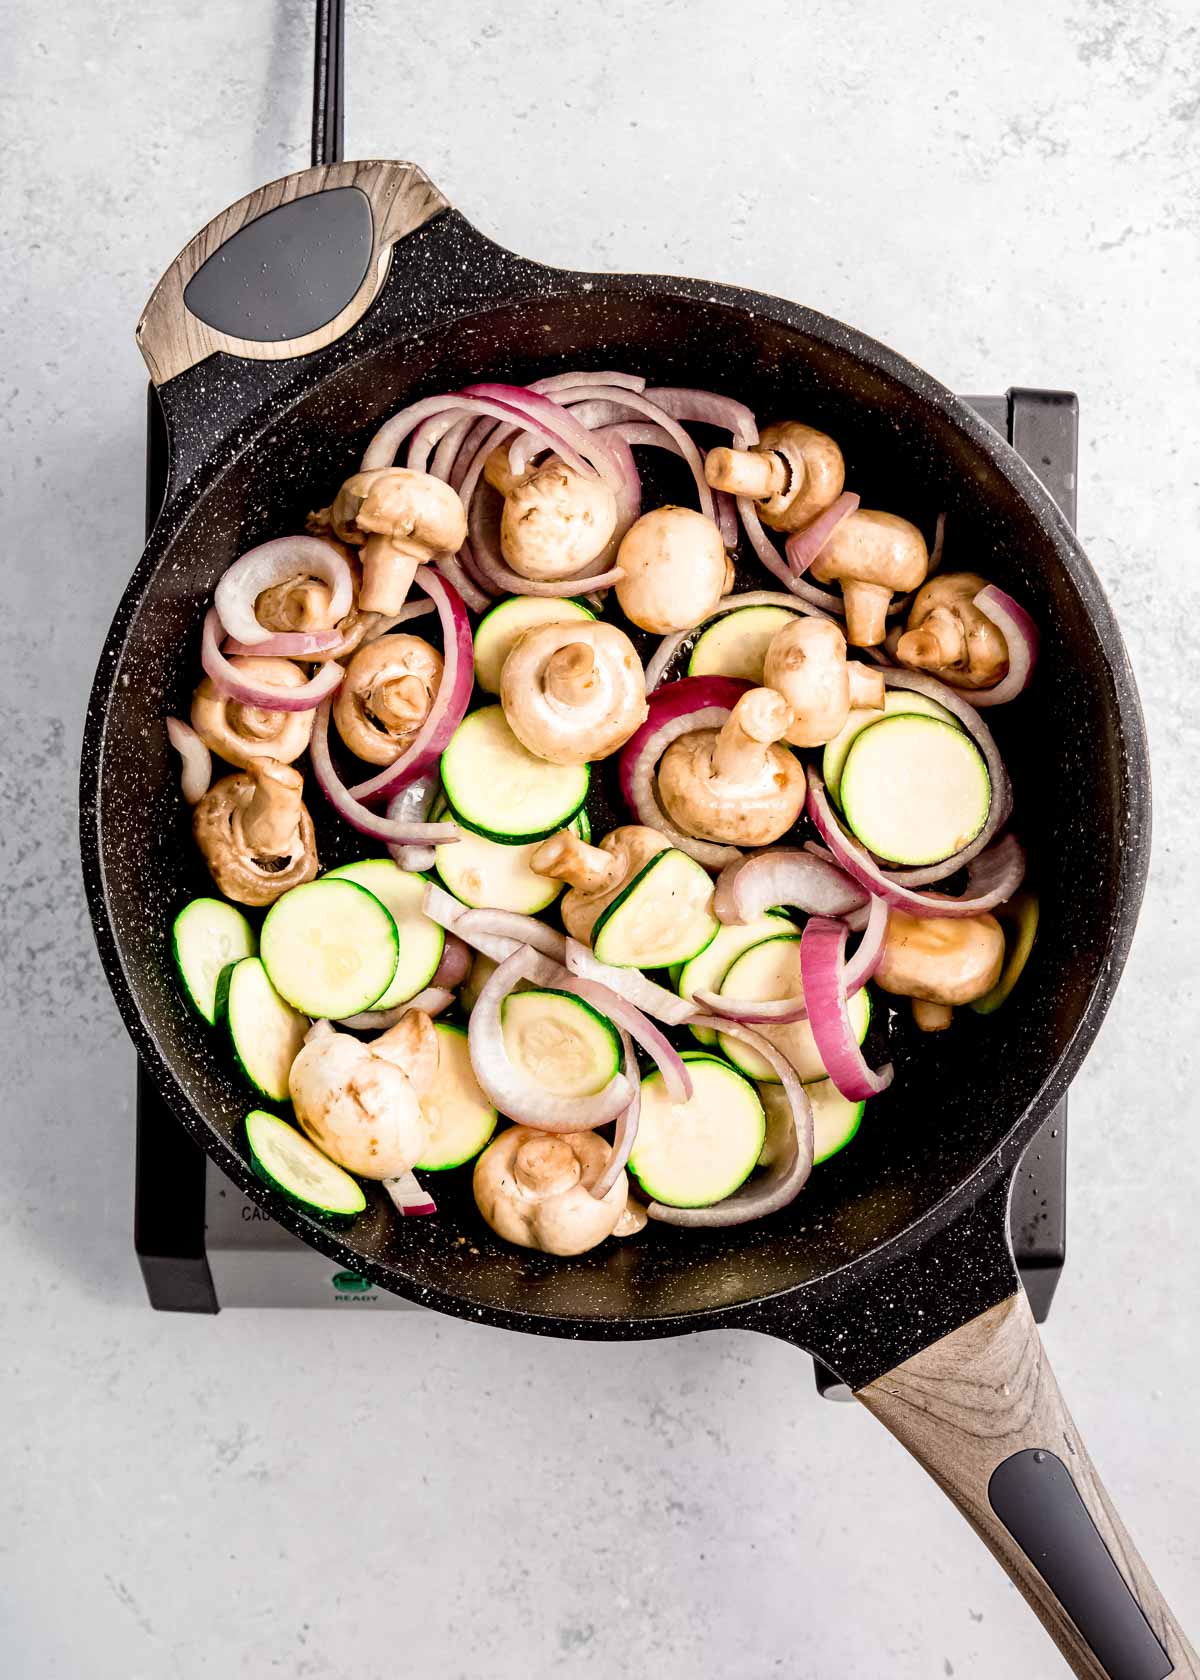 softened mushrooms, zucchini, and onions in skillet